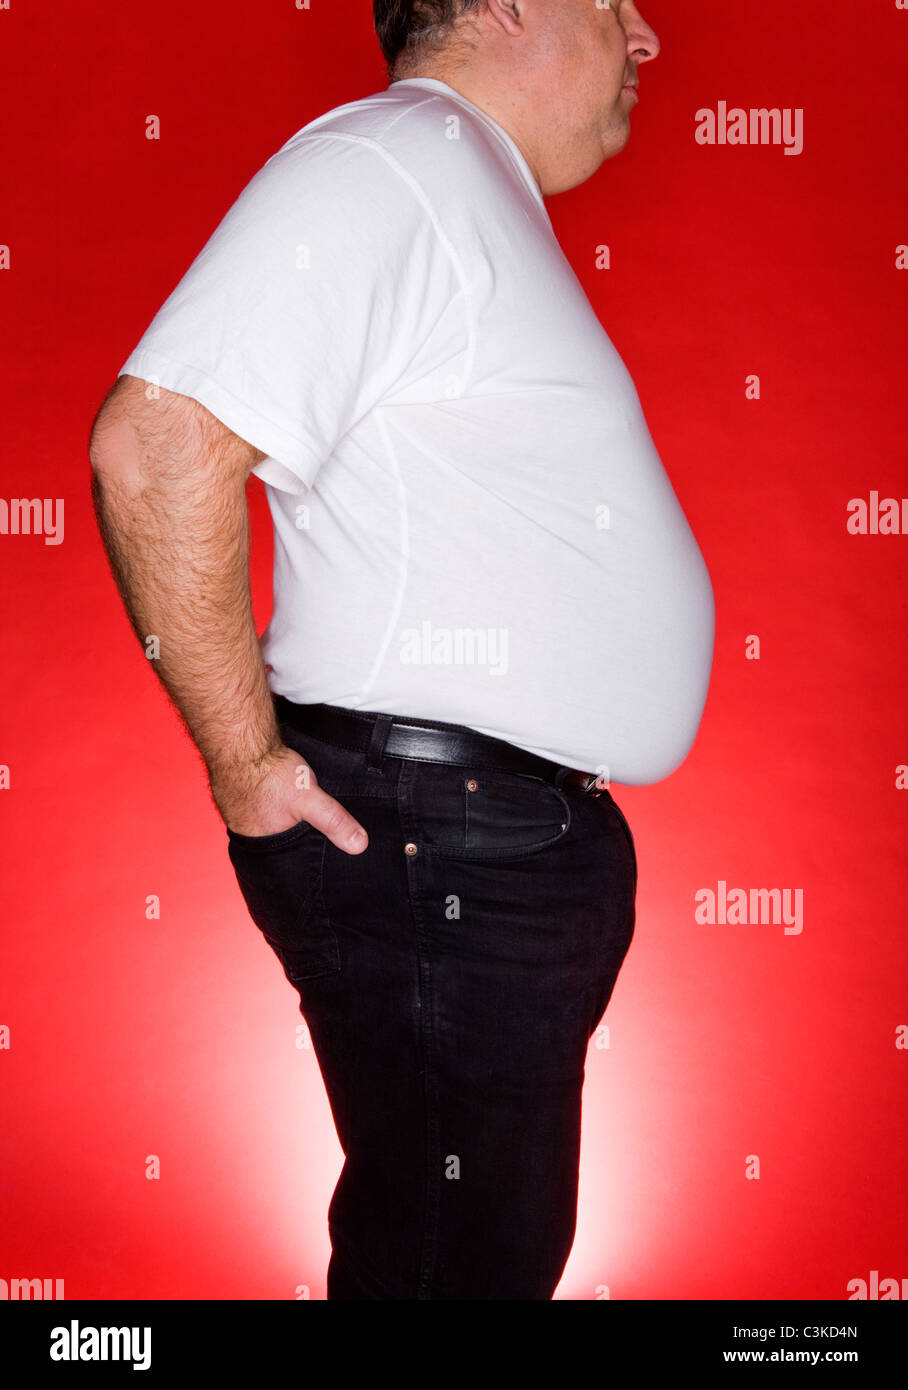 Obese man against red background Stock Photo